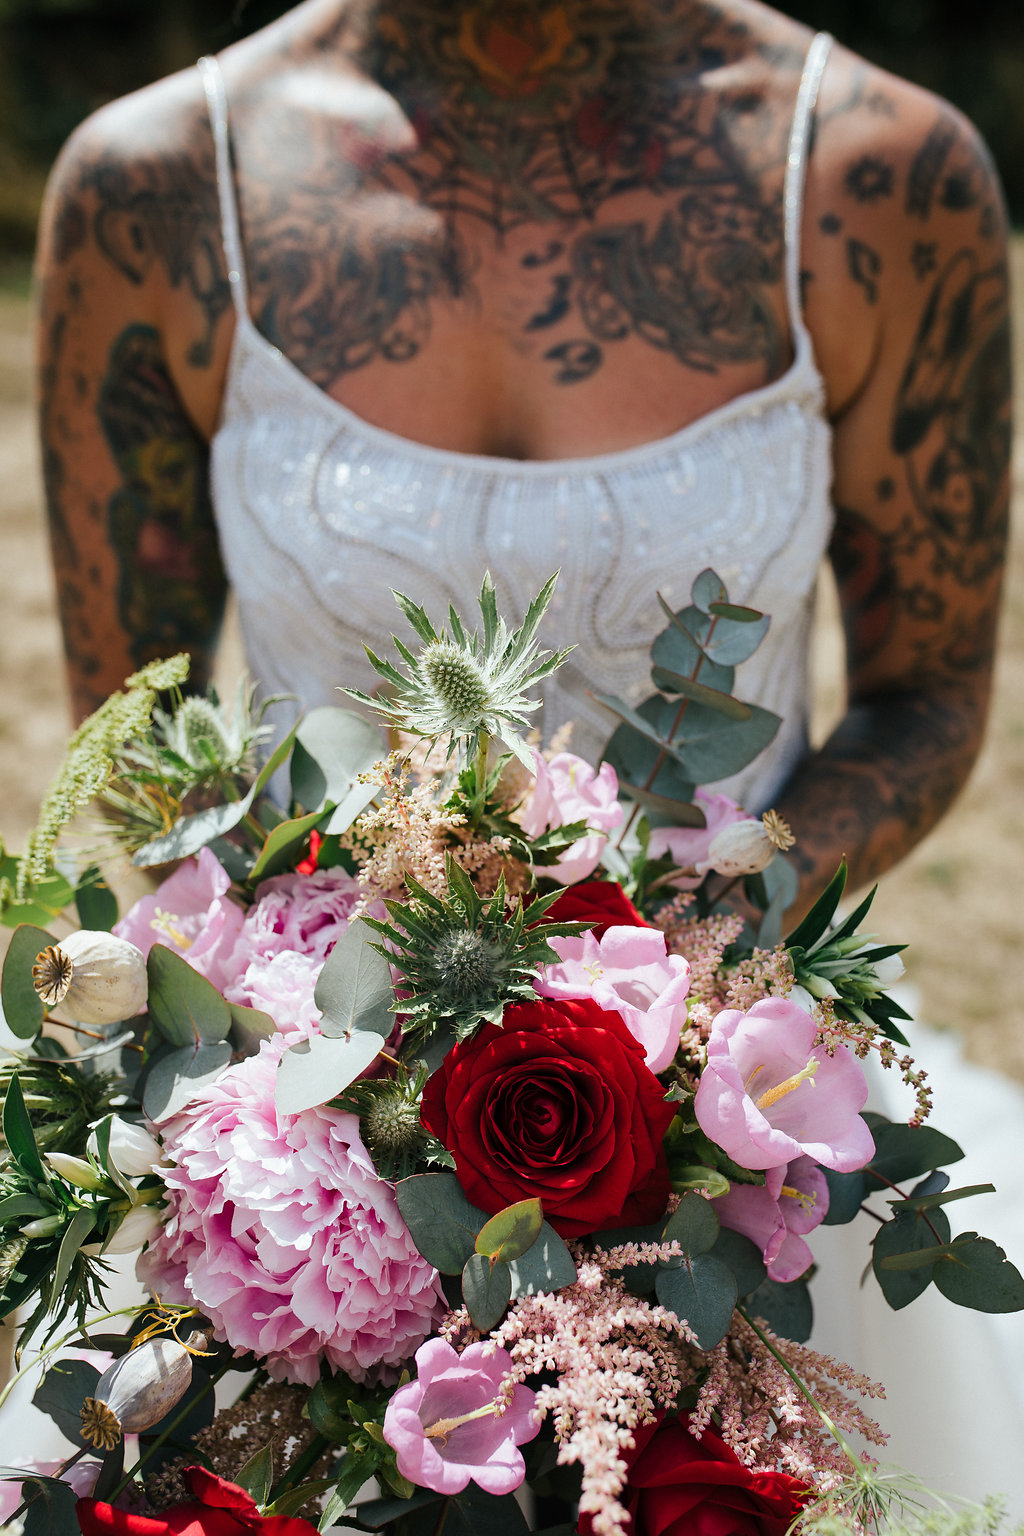 Tattooed Brides - Should You Show Off Your Tattoos On Your Wedding Day?